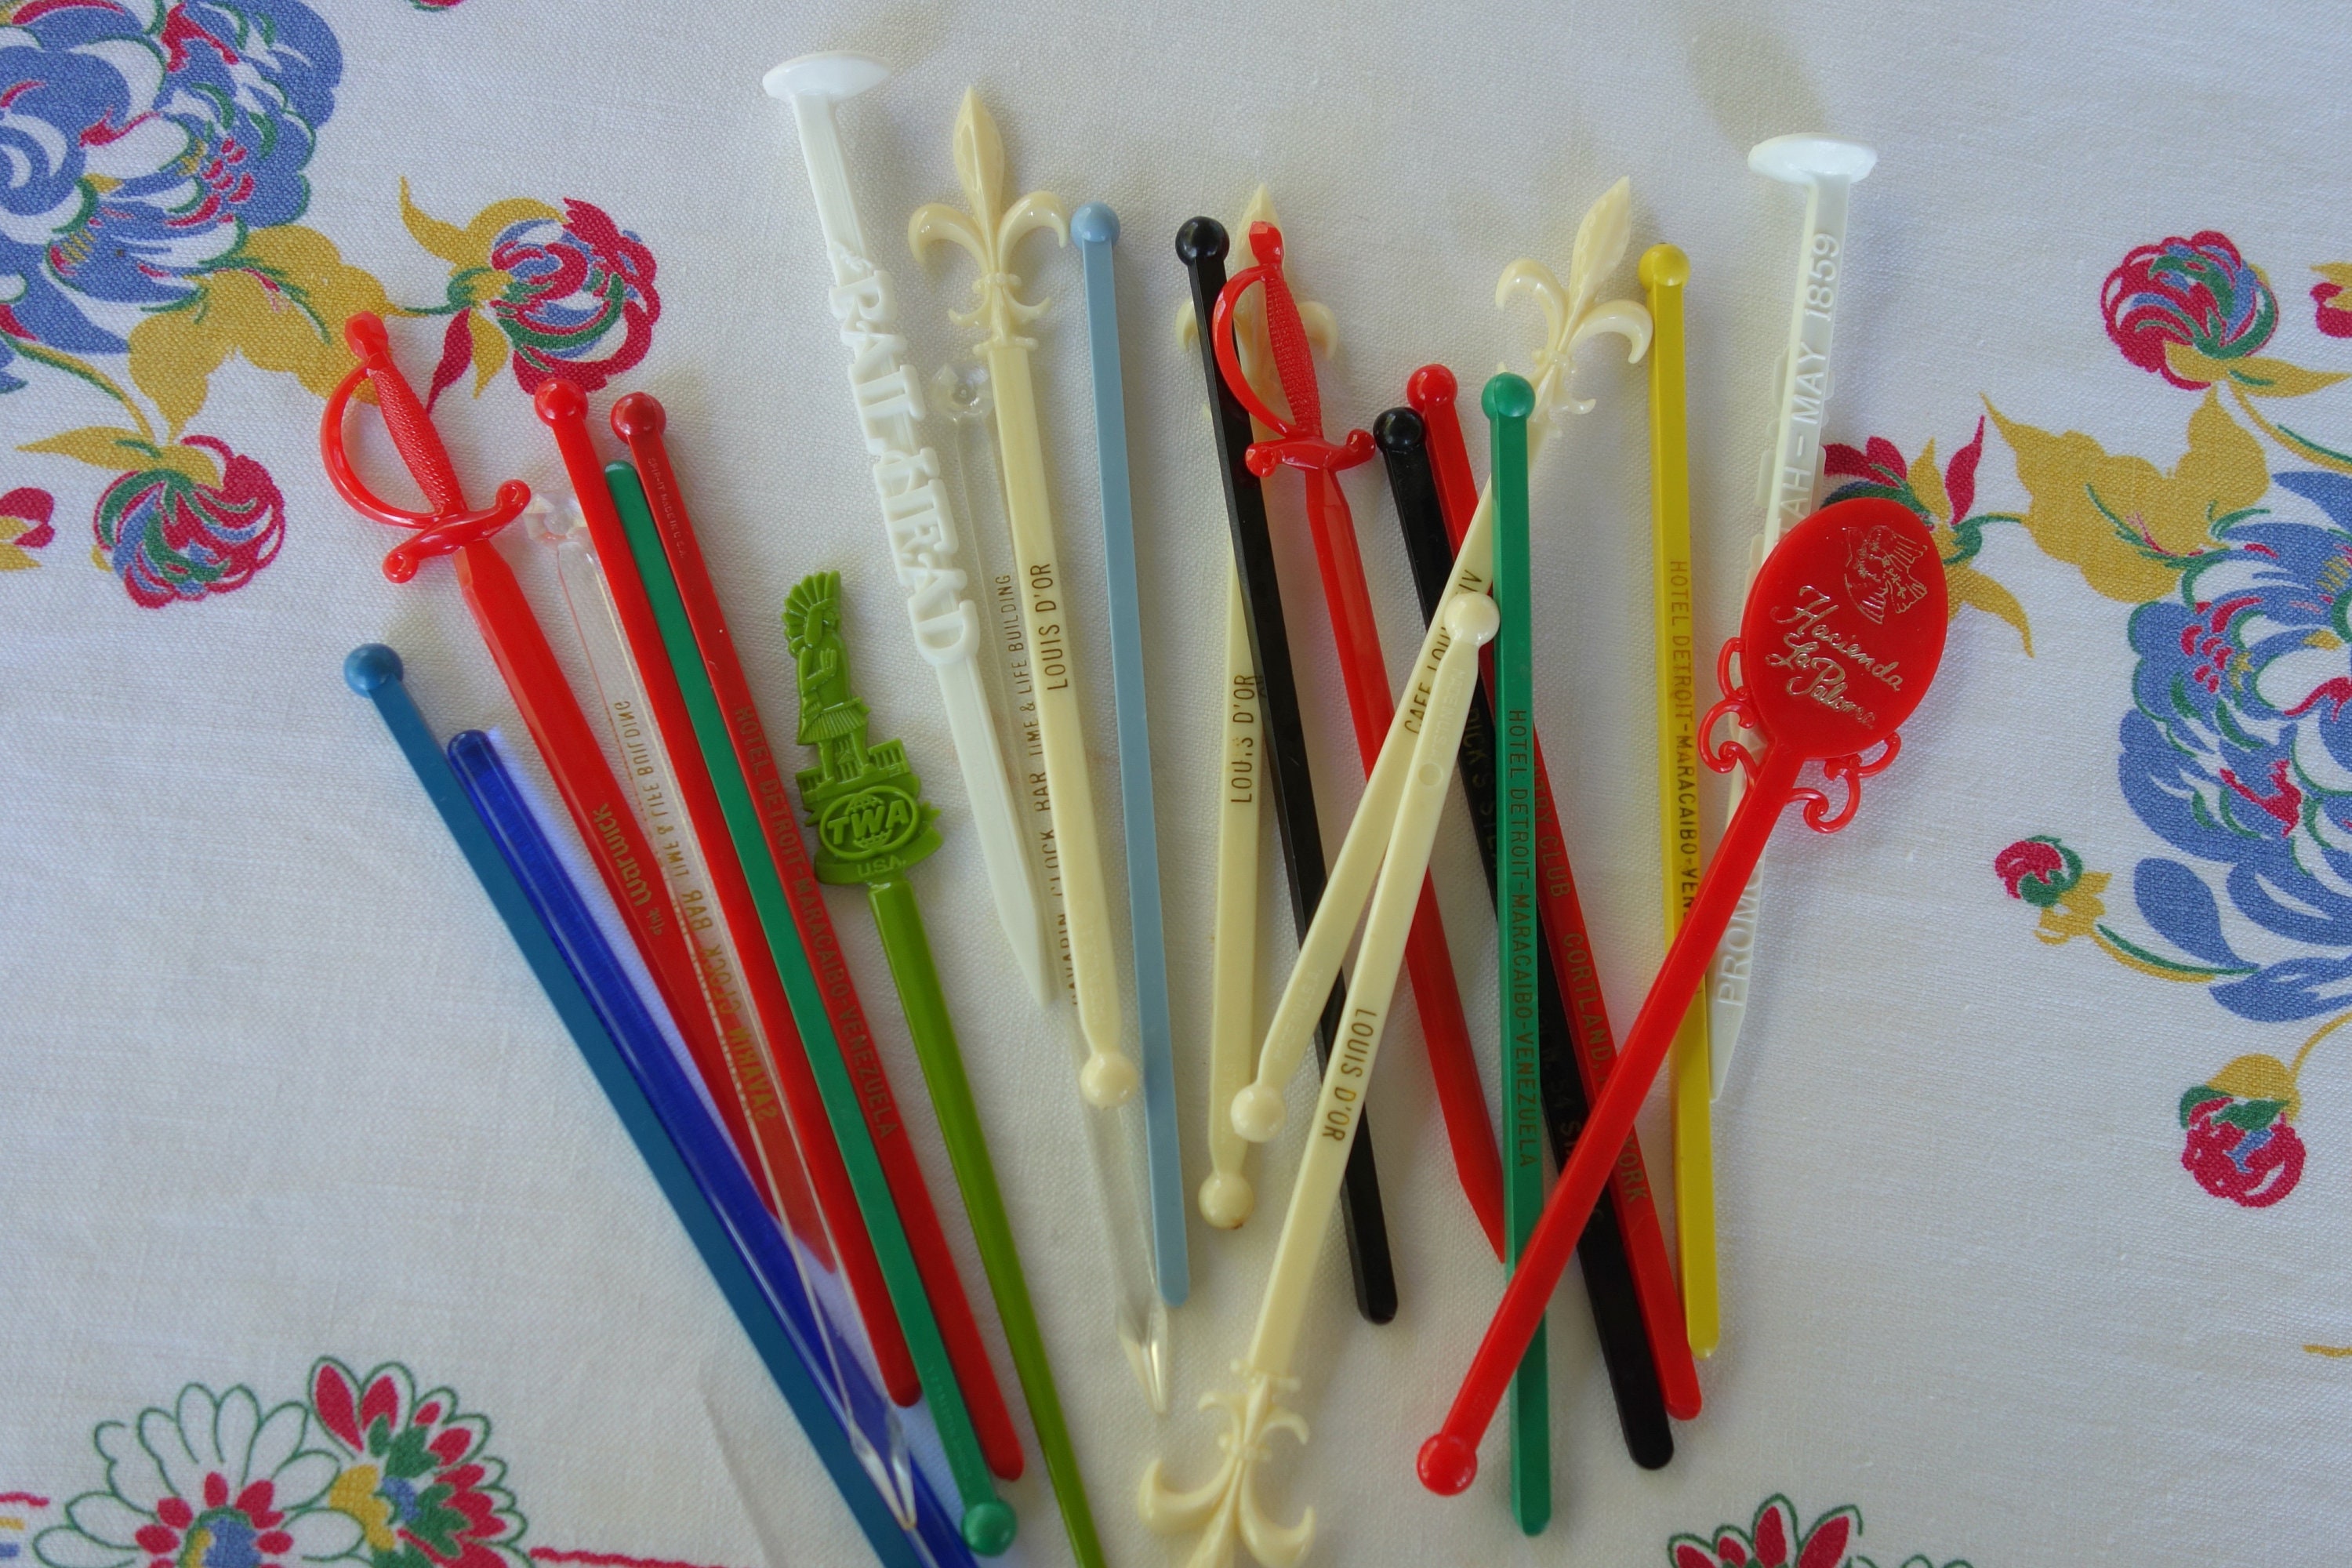 Vintage Plastic Drink Stir Sticks From Cocktail Lounges and Restaurants  Around the US Collection of Drink Stirrers & Ice Cream Drink Spoons 